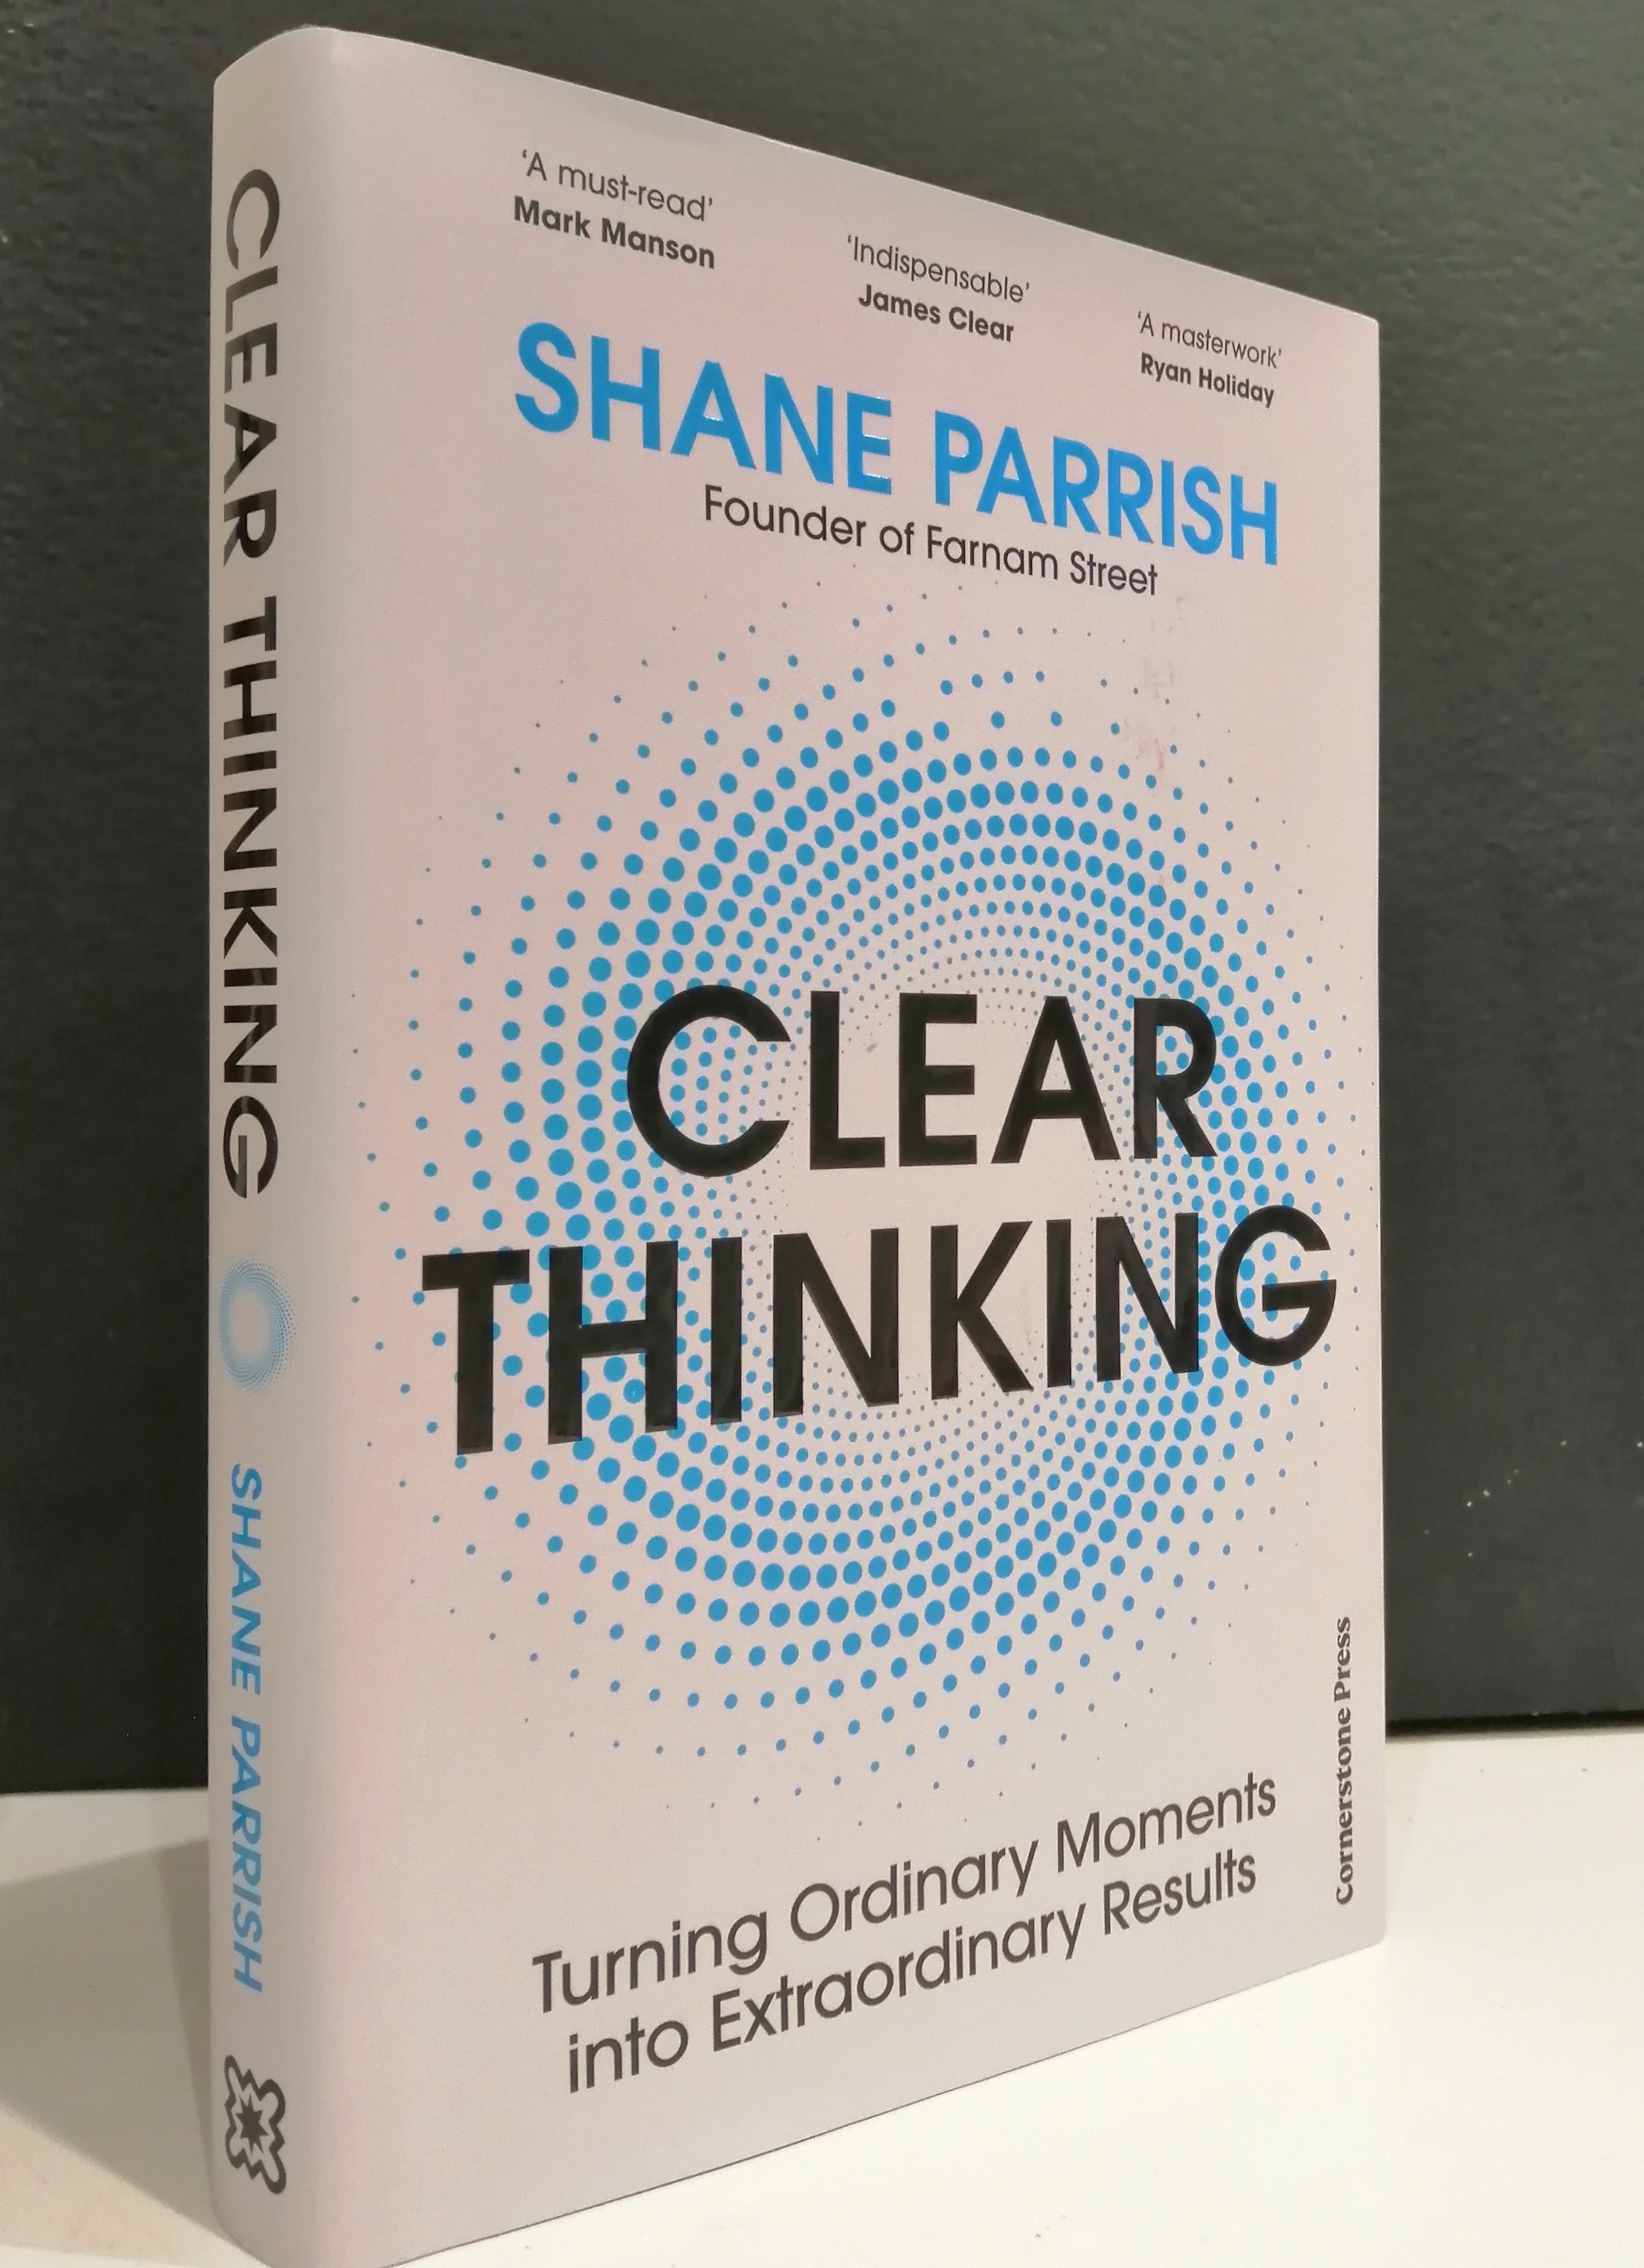 Clear Thinking: Turning Ordinary Moments Into Extraordinary Results